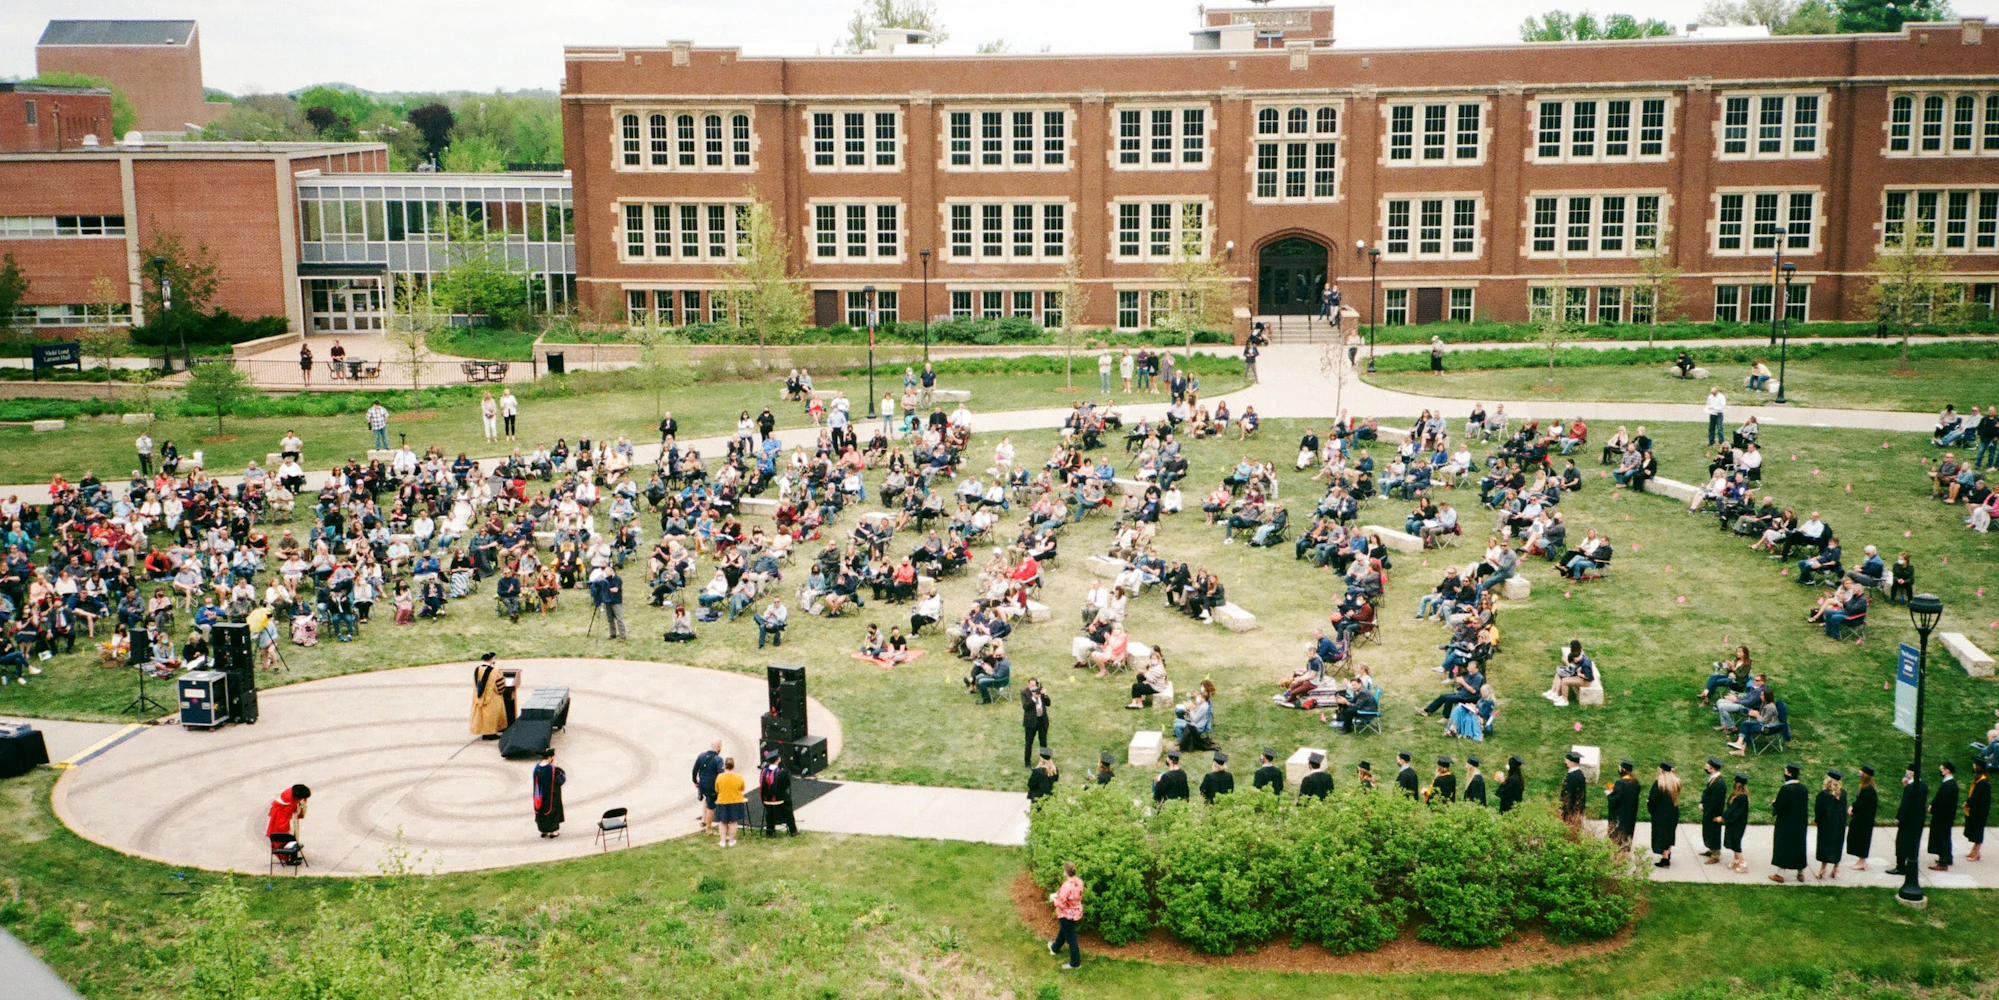 Students assembled outdoors on a college campus, listening to a speaker.